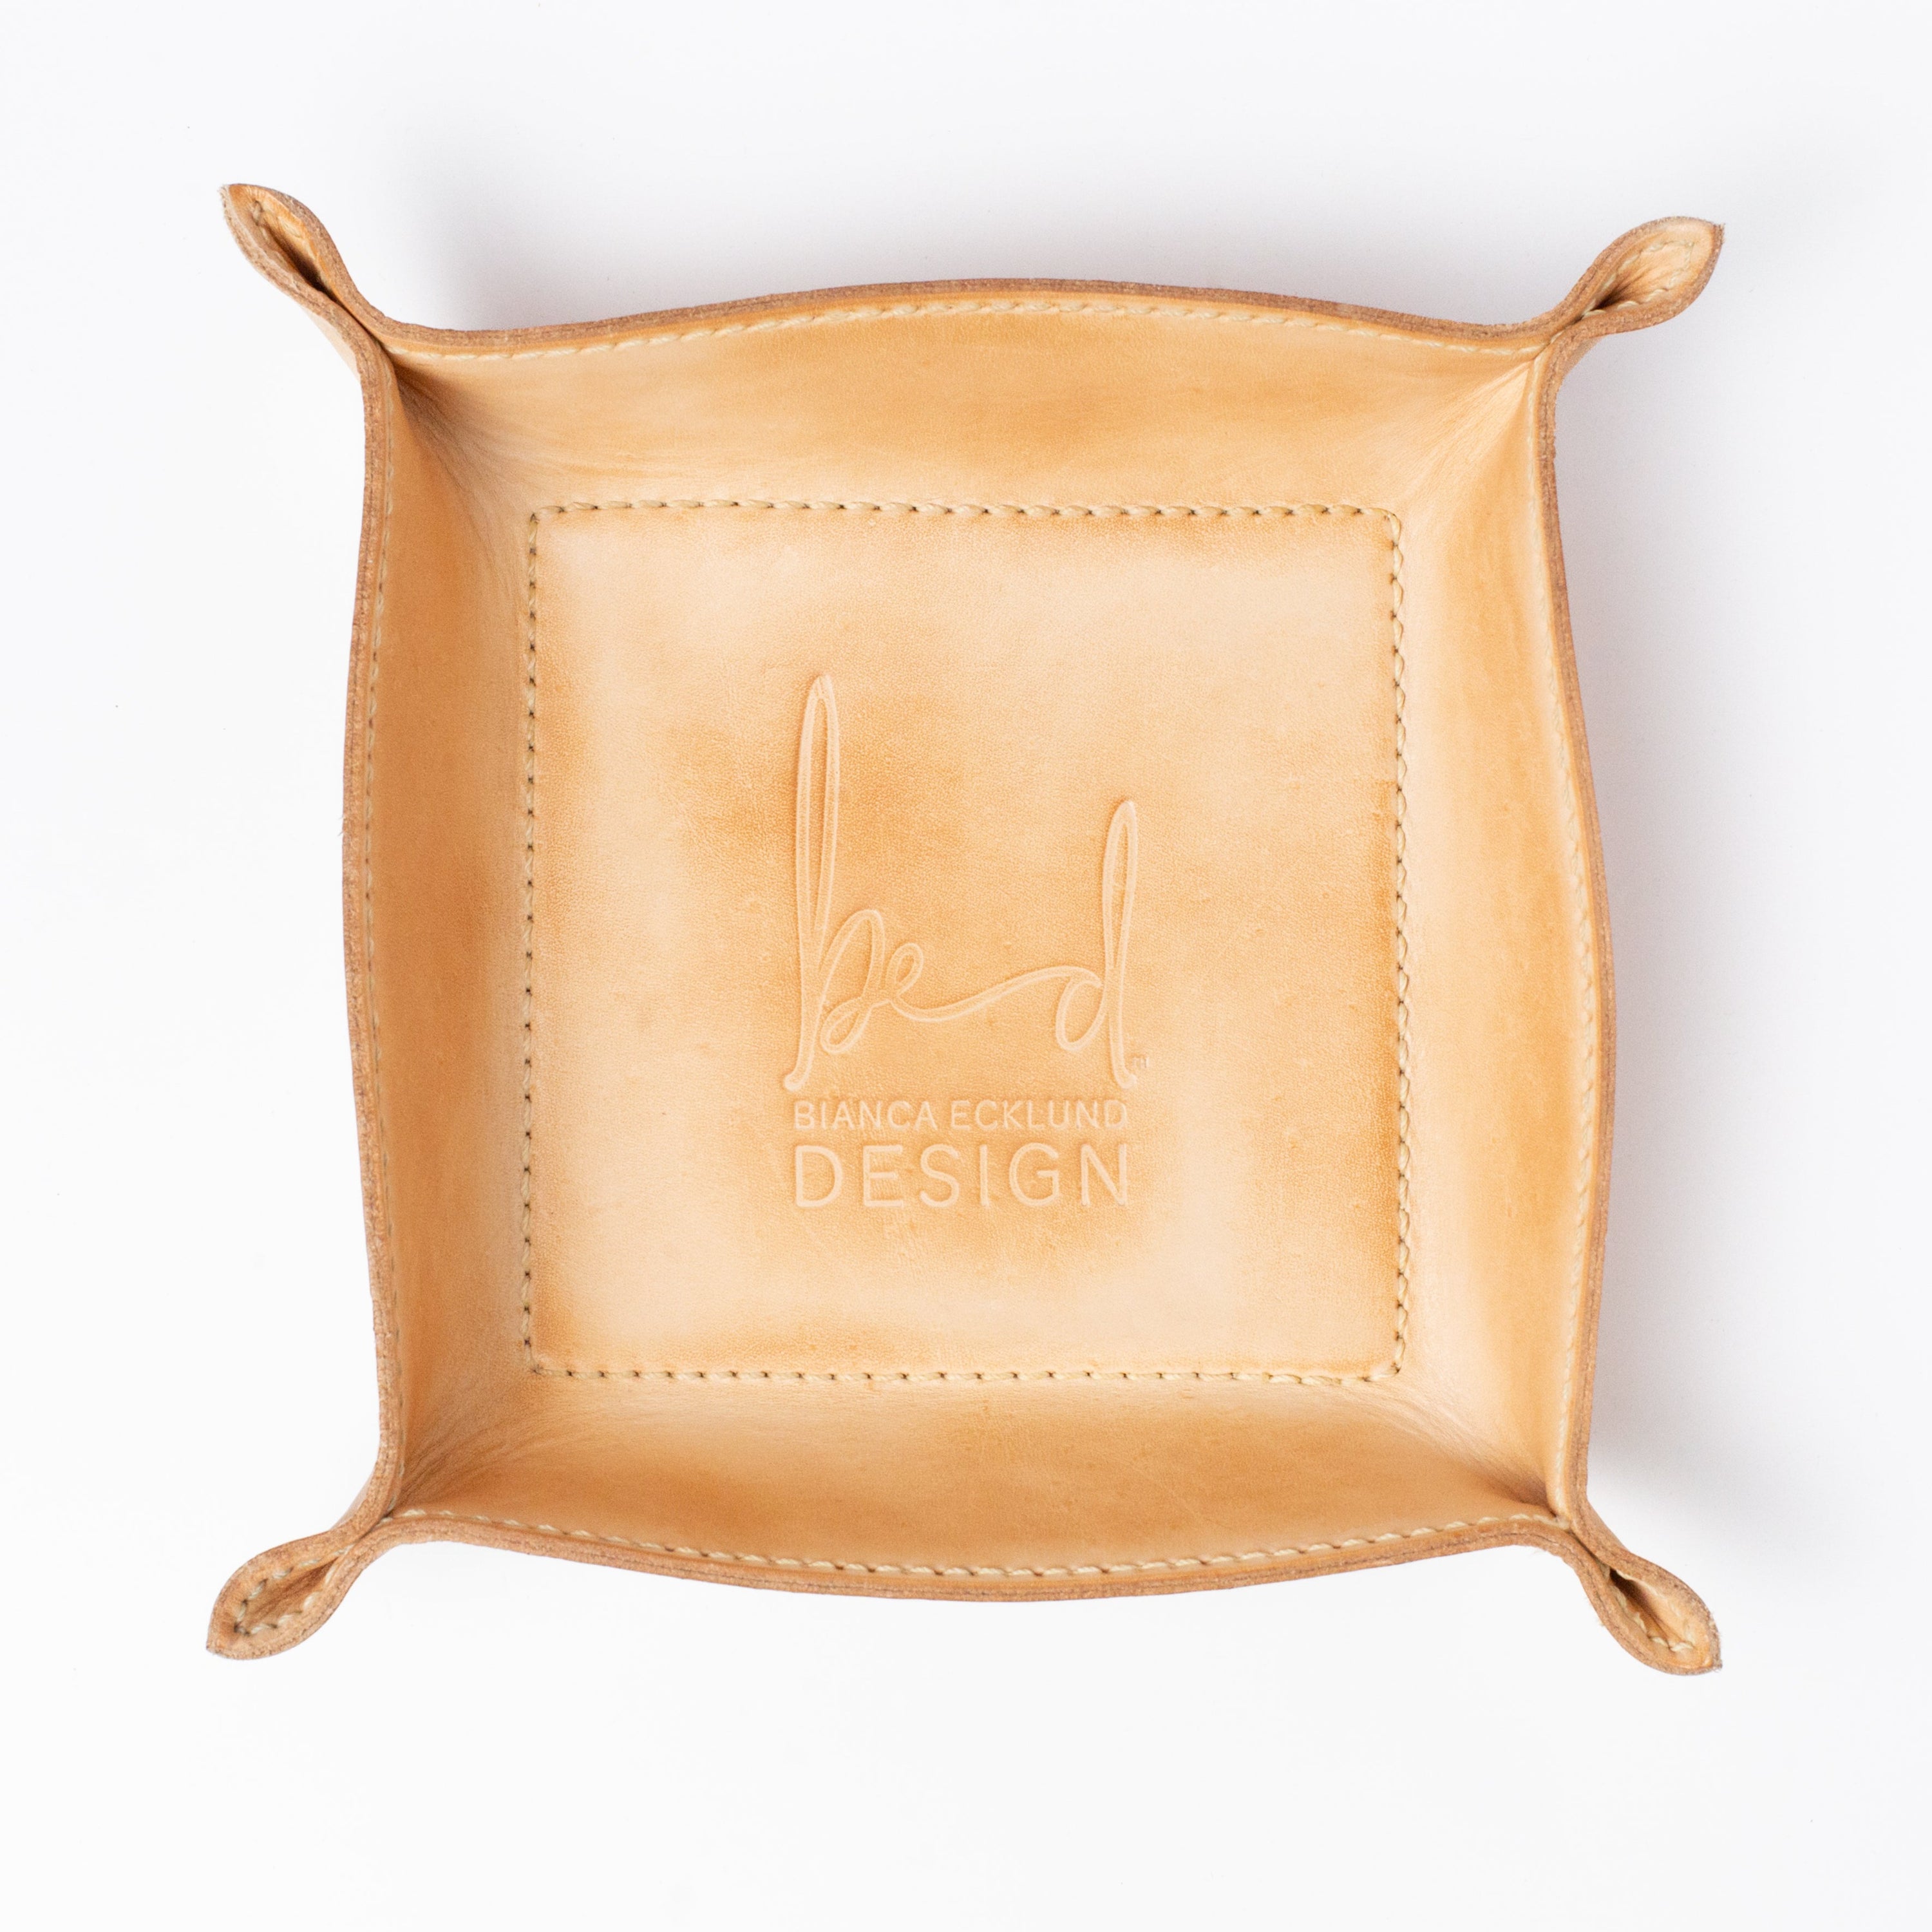 BED Leather Catchall Tray